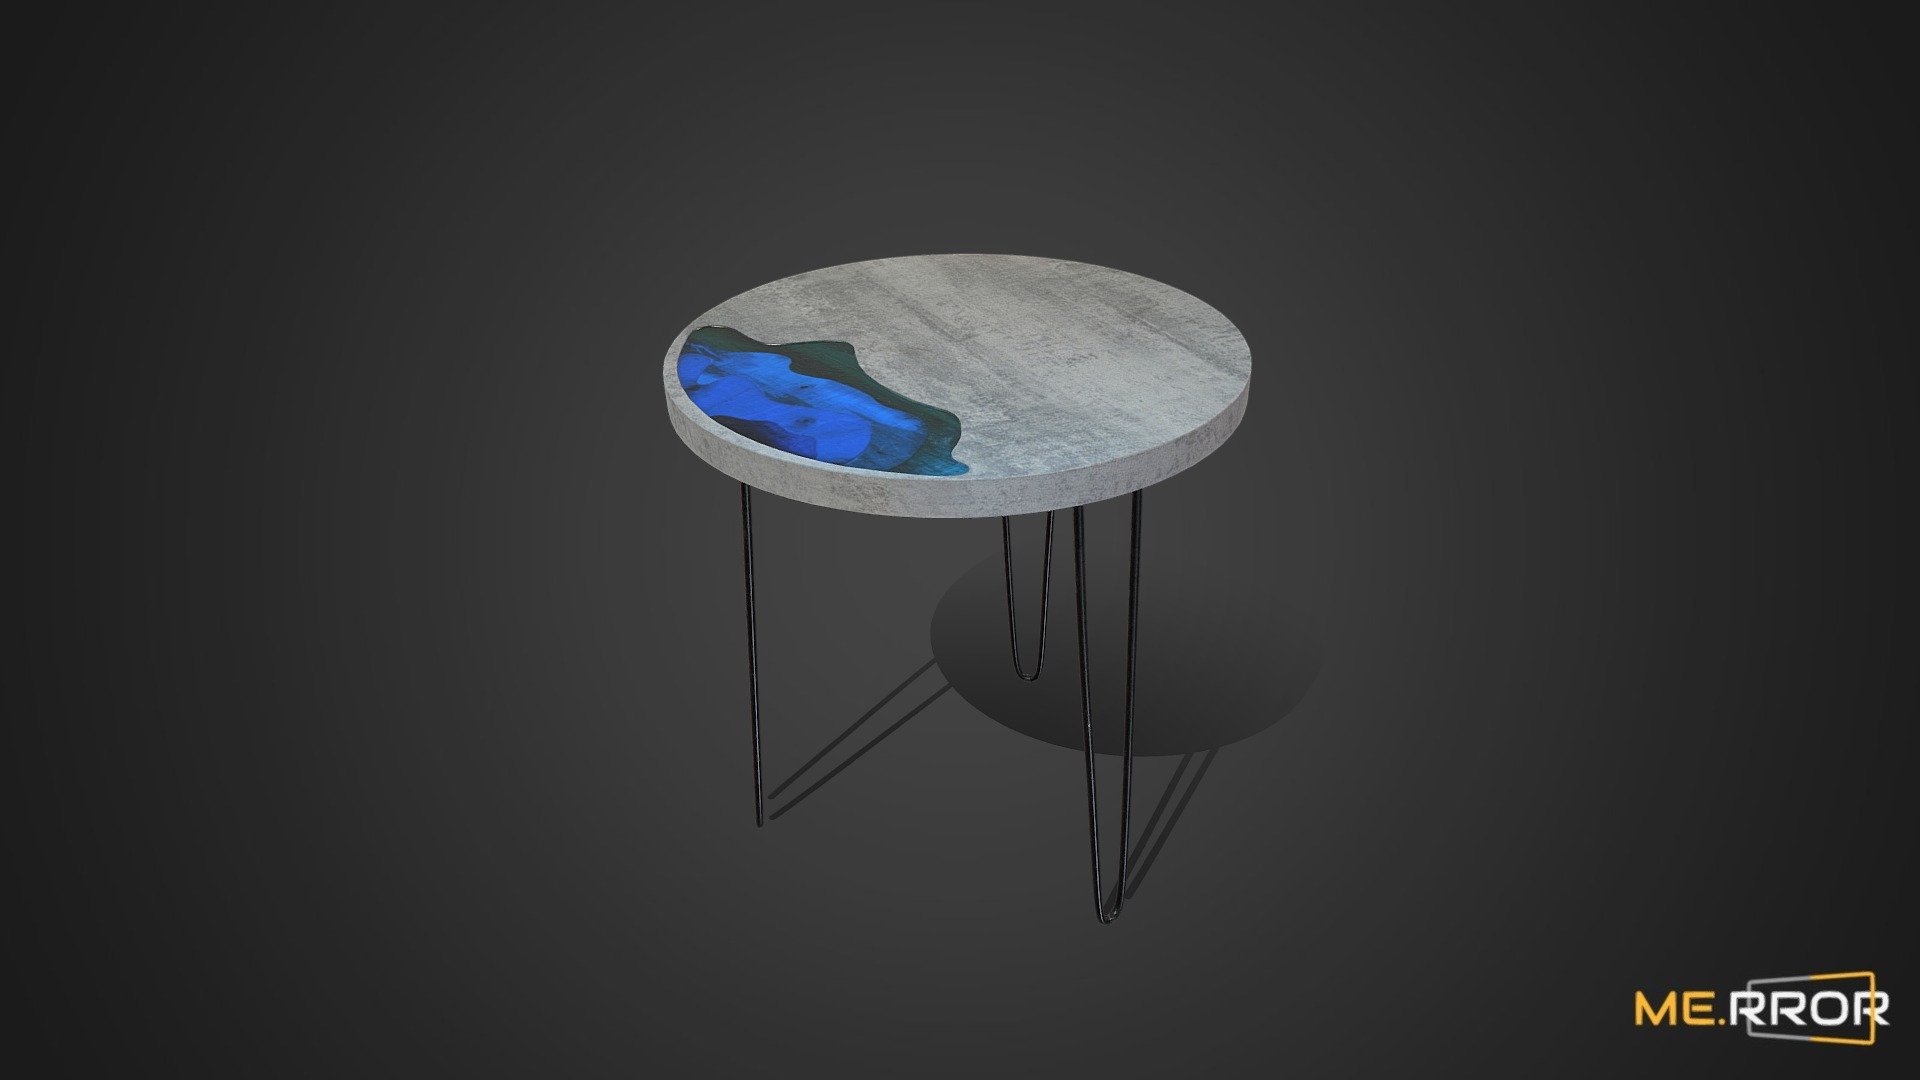 MERROR is a 3D Content PLATFORM which introduces various Asian assets to the 3D world


3DScanning #Photogrametry #ME.RROR - [Game-Ready] Modern Table - Buy Royalty Free 3D model by ME.RROR (@merror) 3d model